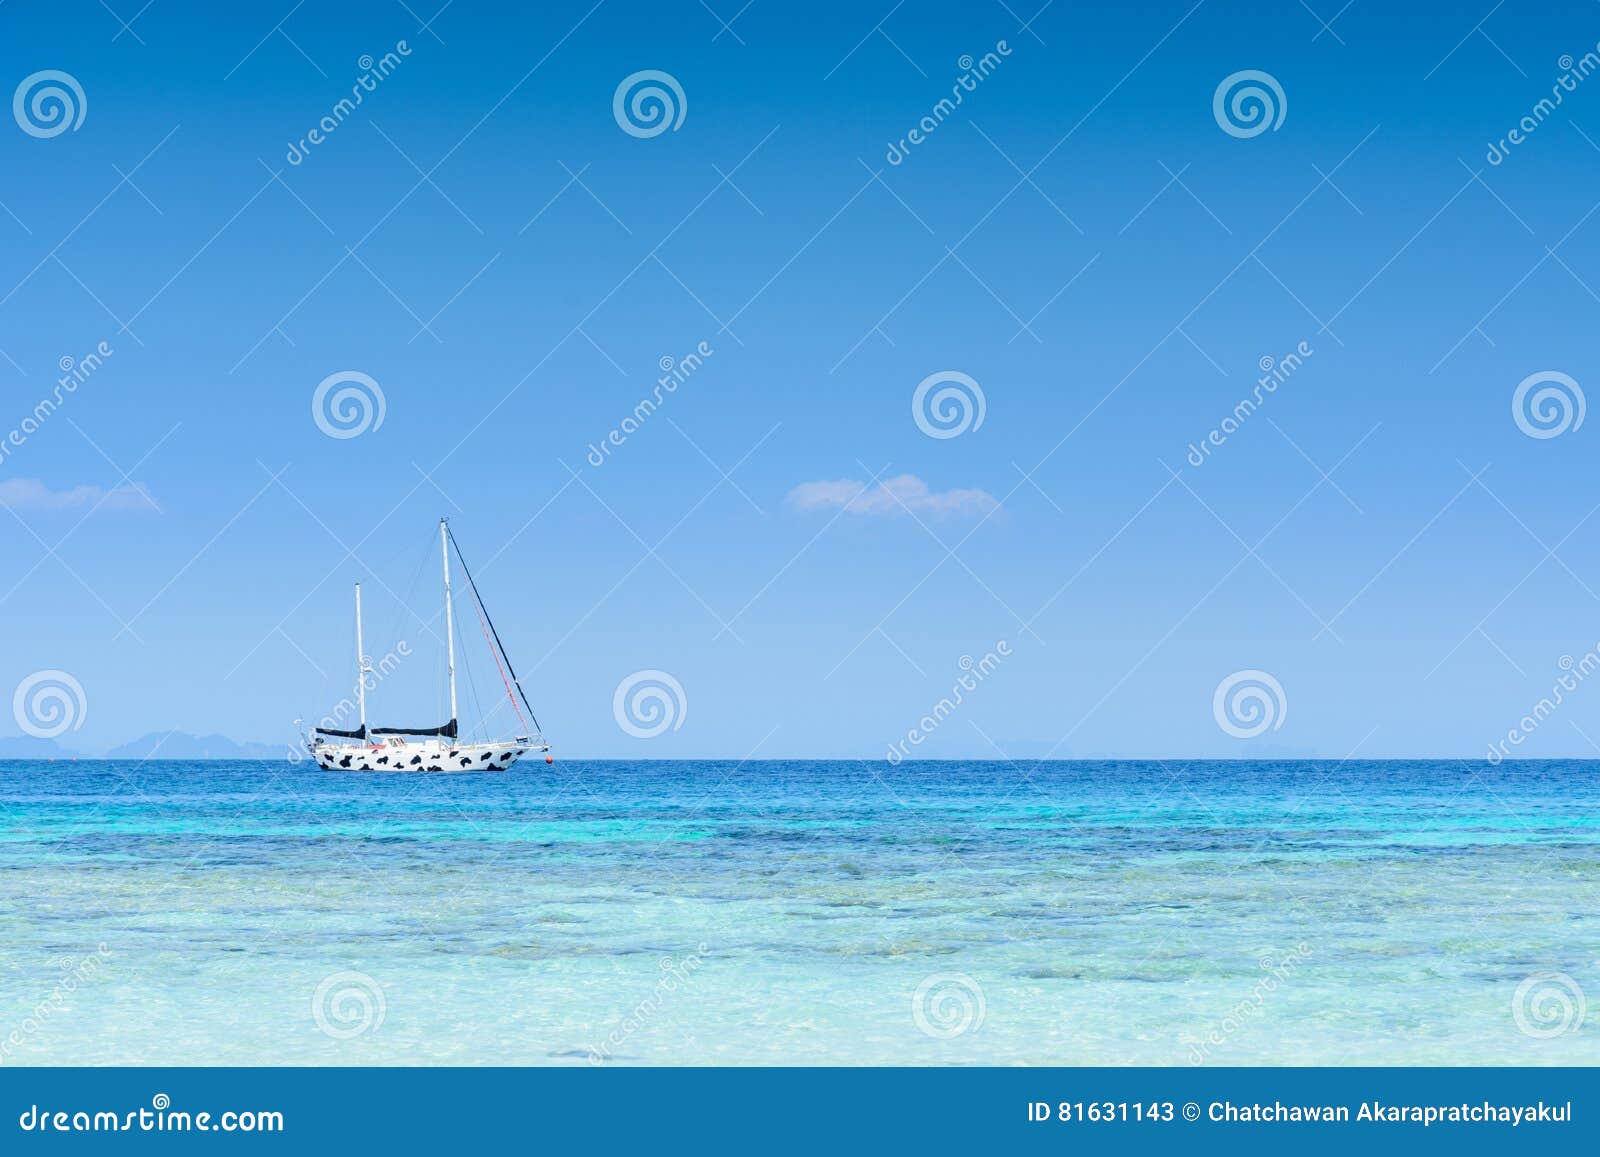 Yacht Floating In The Sea With Blue Sky Stock Image Image Of Sailing